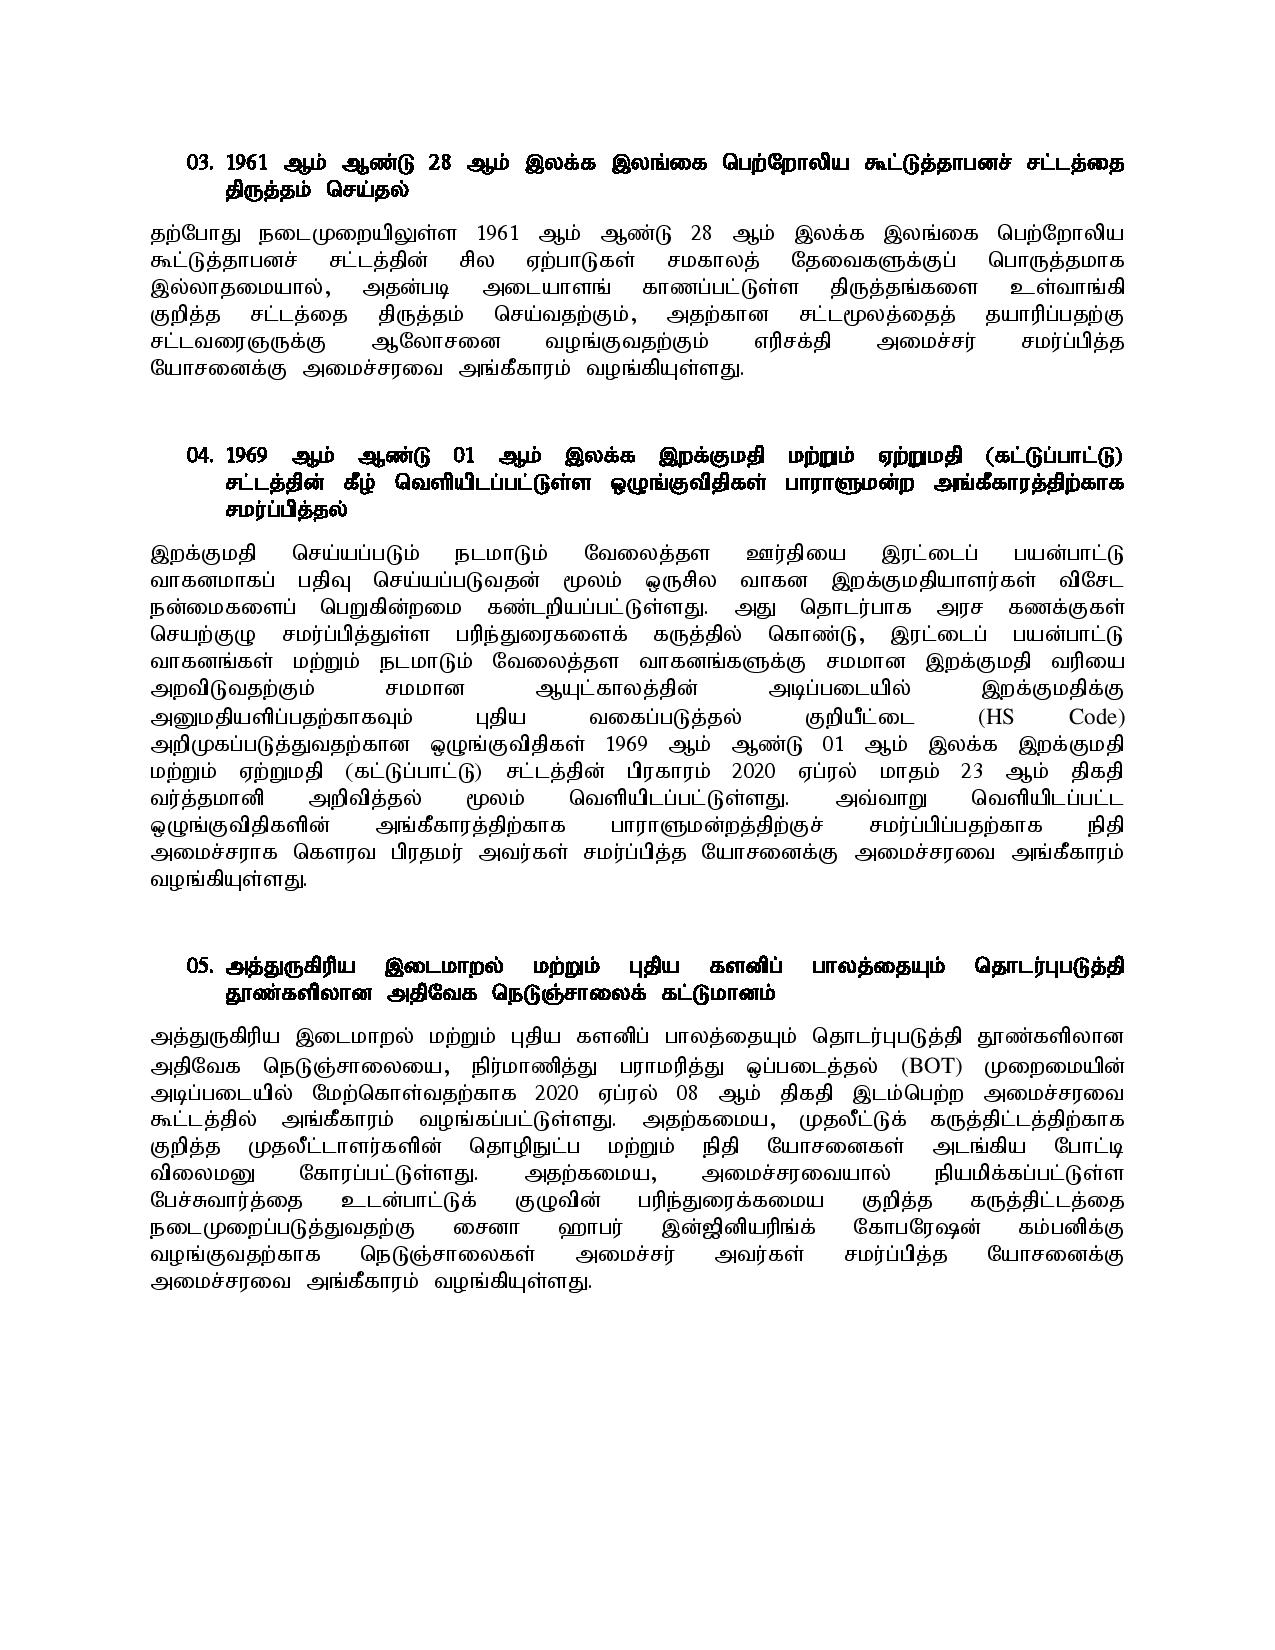 Cabinet Decision on 24.05.2021 Tamil 1 page 002